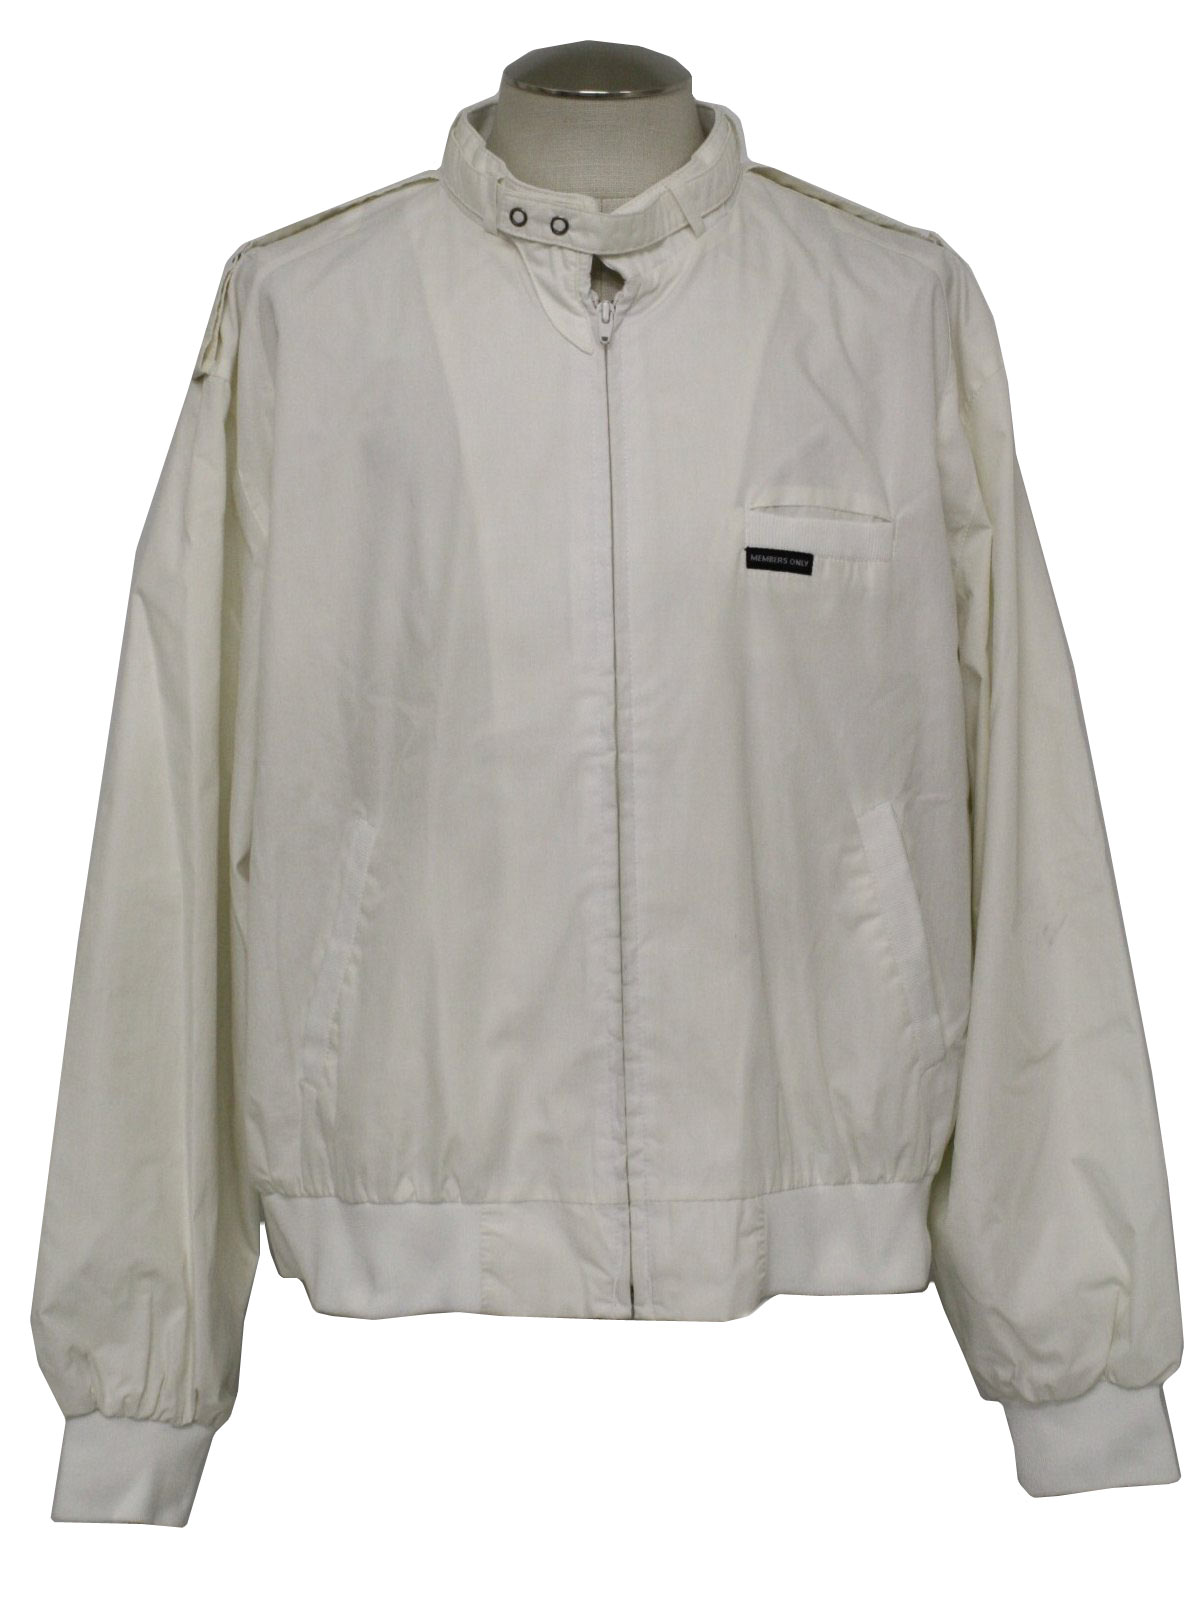 Retro Eighties Jacket: 80s -Members Only- Mens white polyester cotton ...